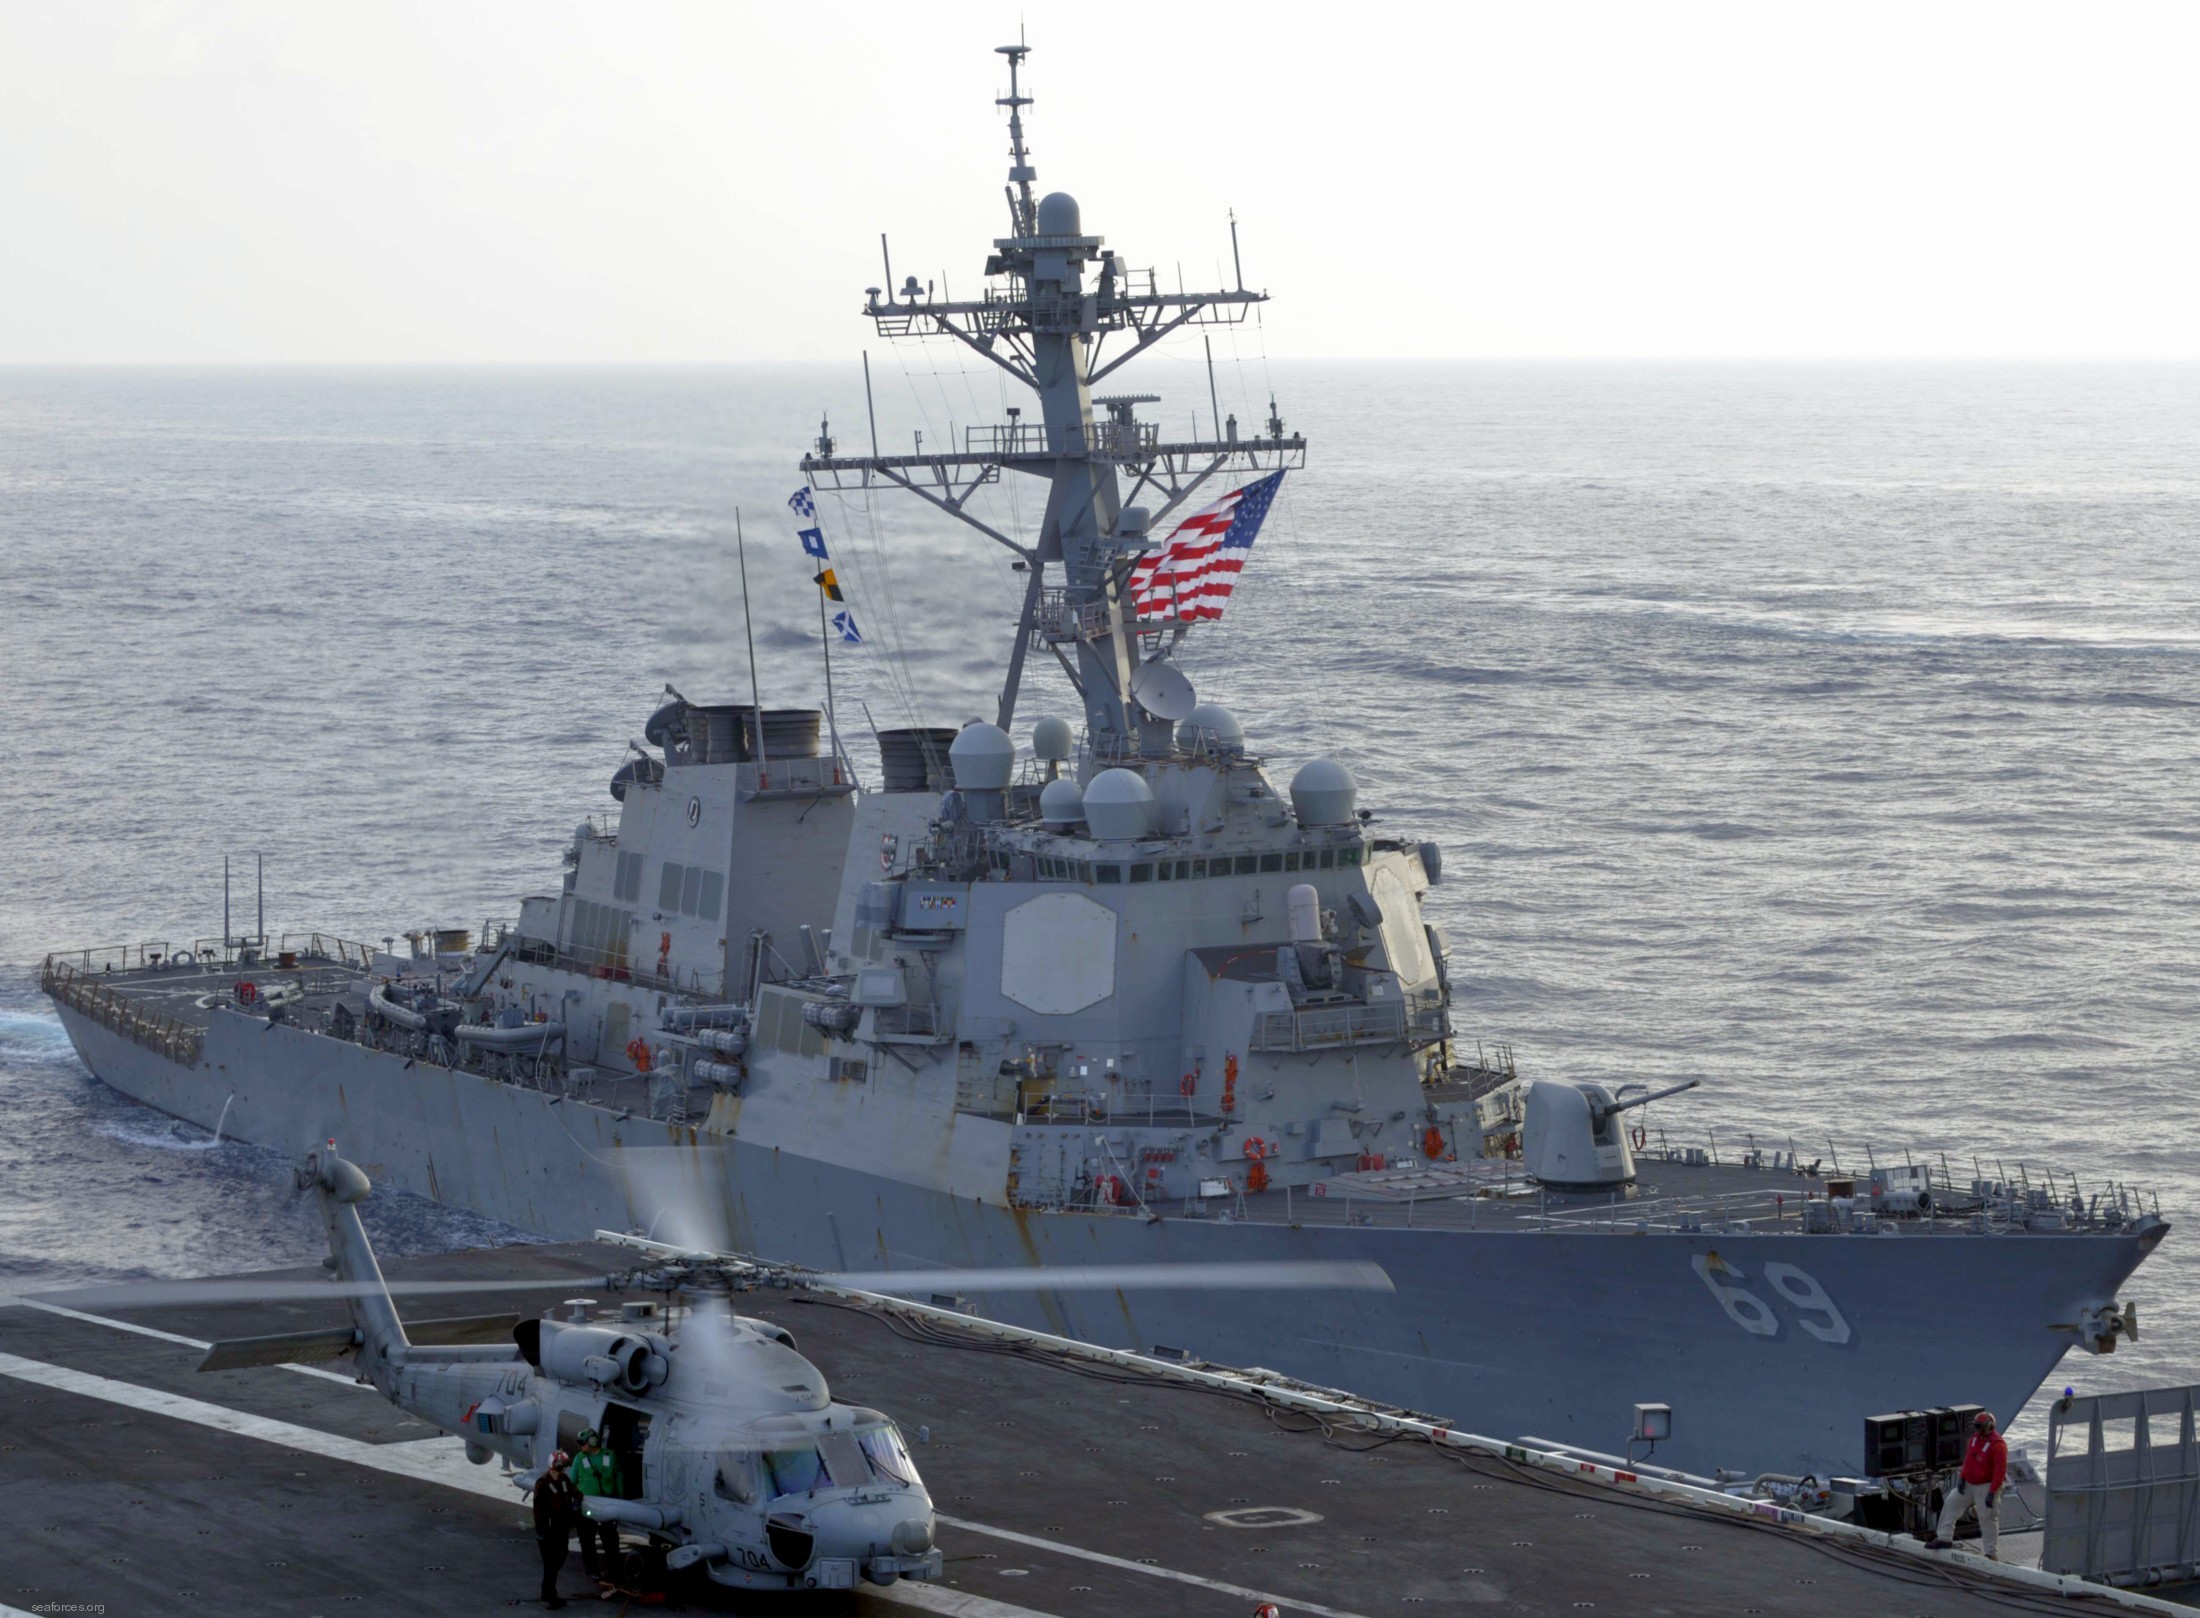 ddg-69 uss milius guided missile destroyer arleigh burke class aegis bmd 10